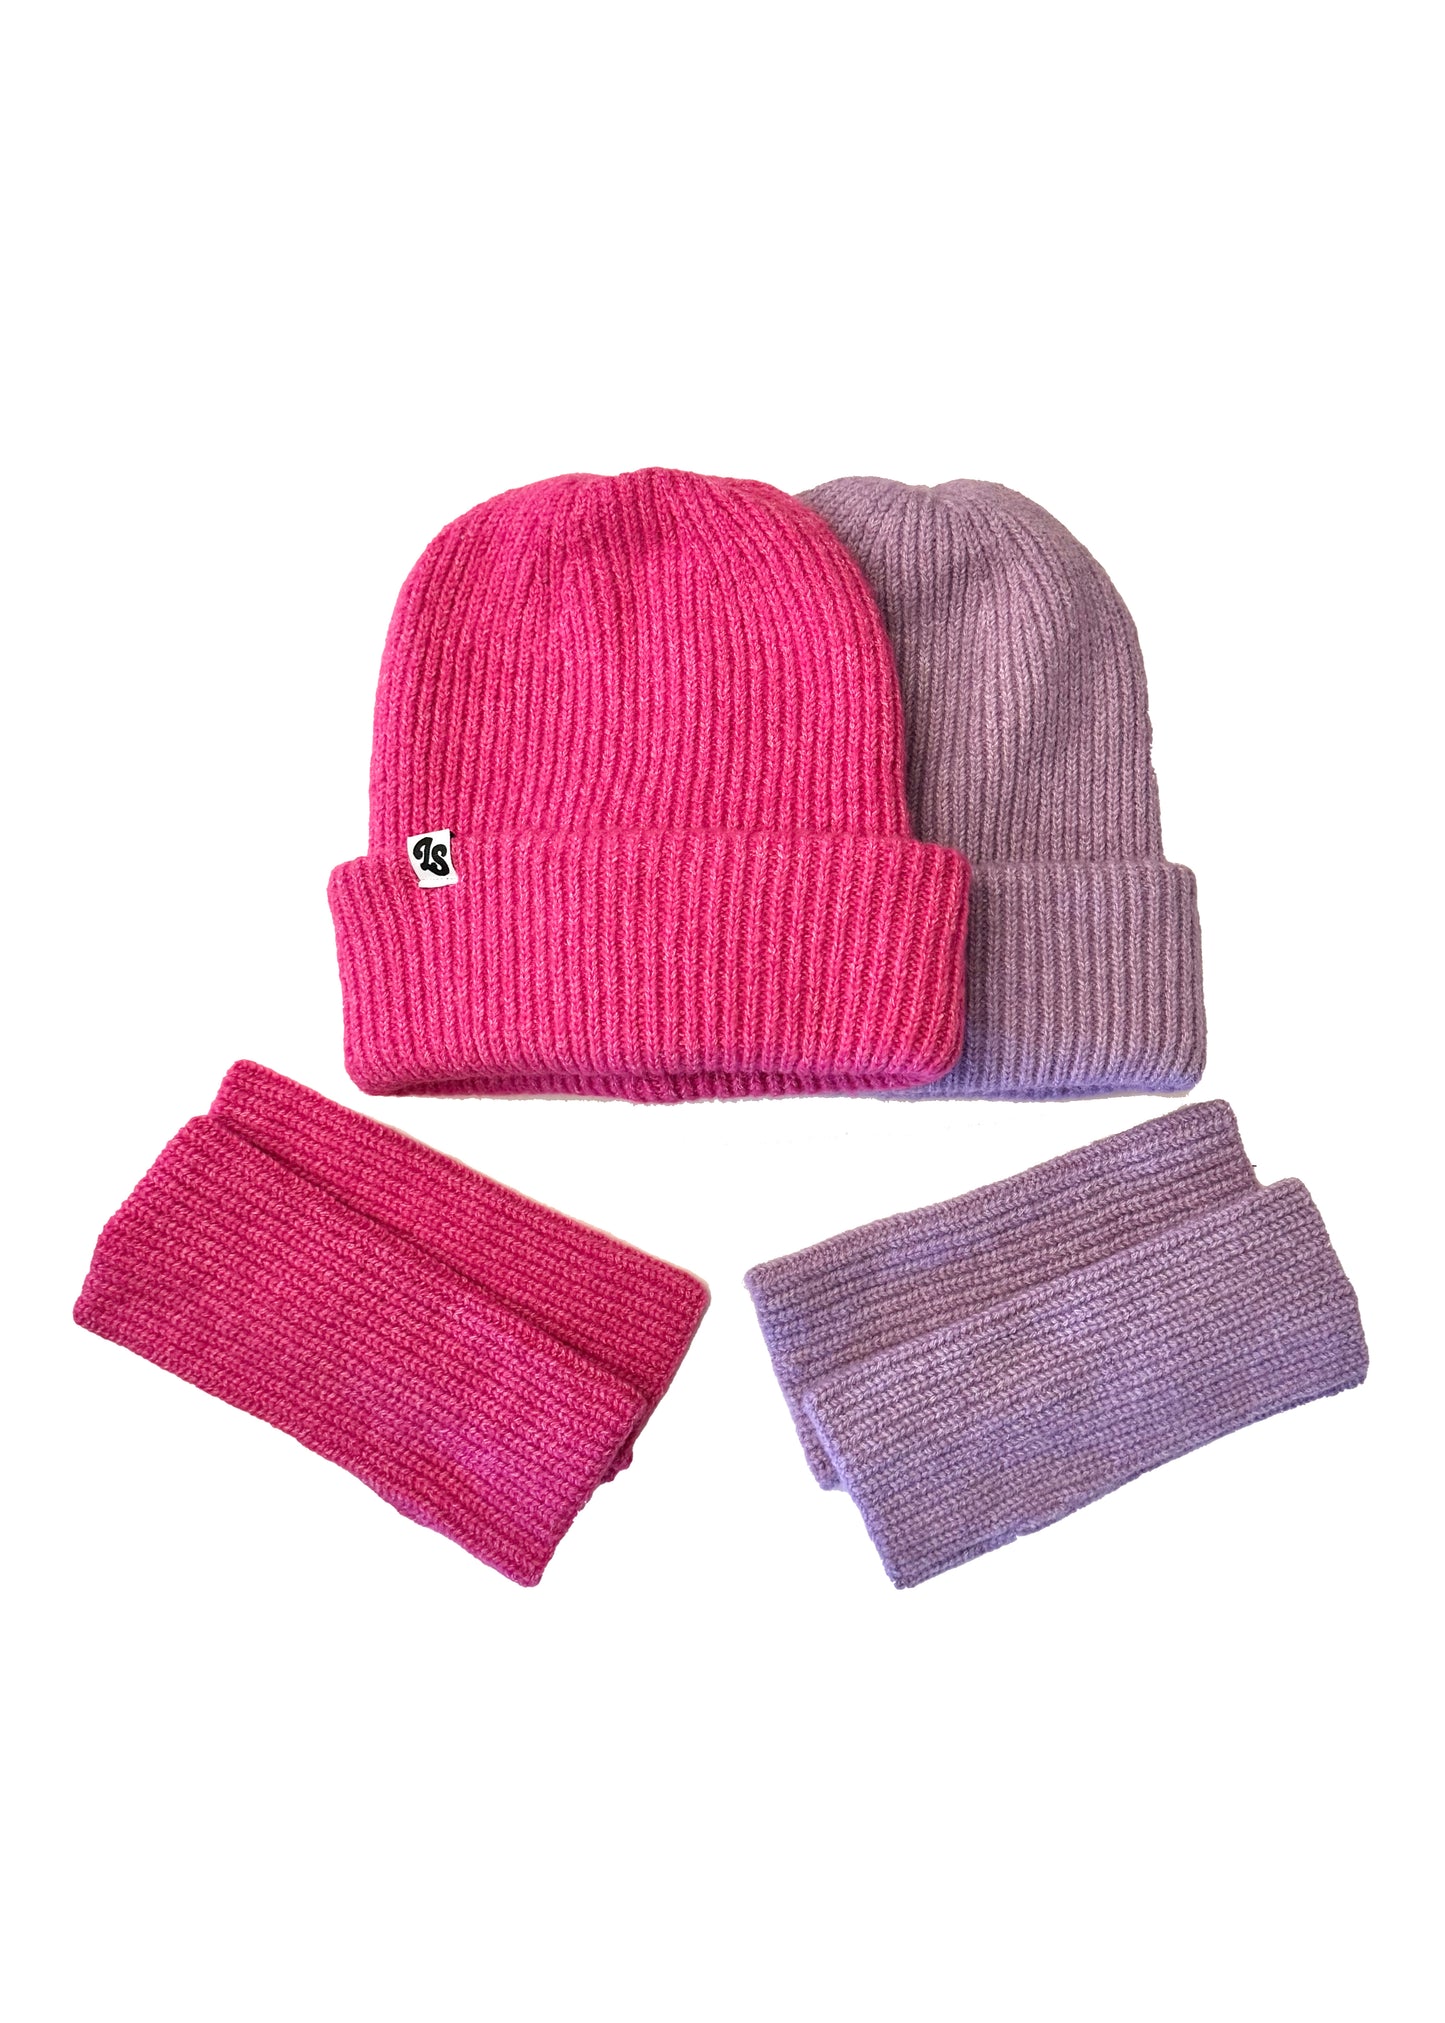 Adult Pink Thick Beanie